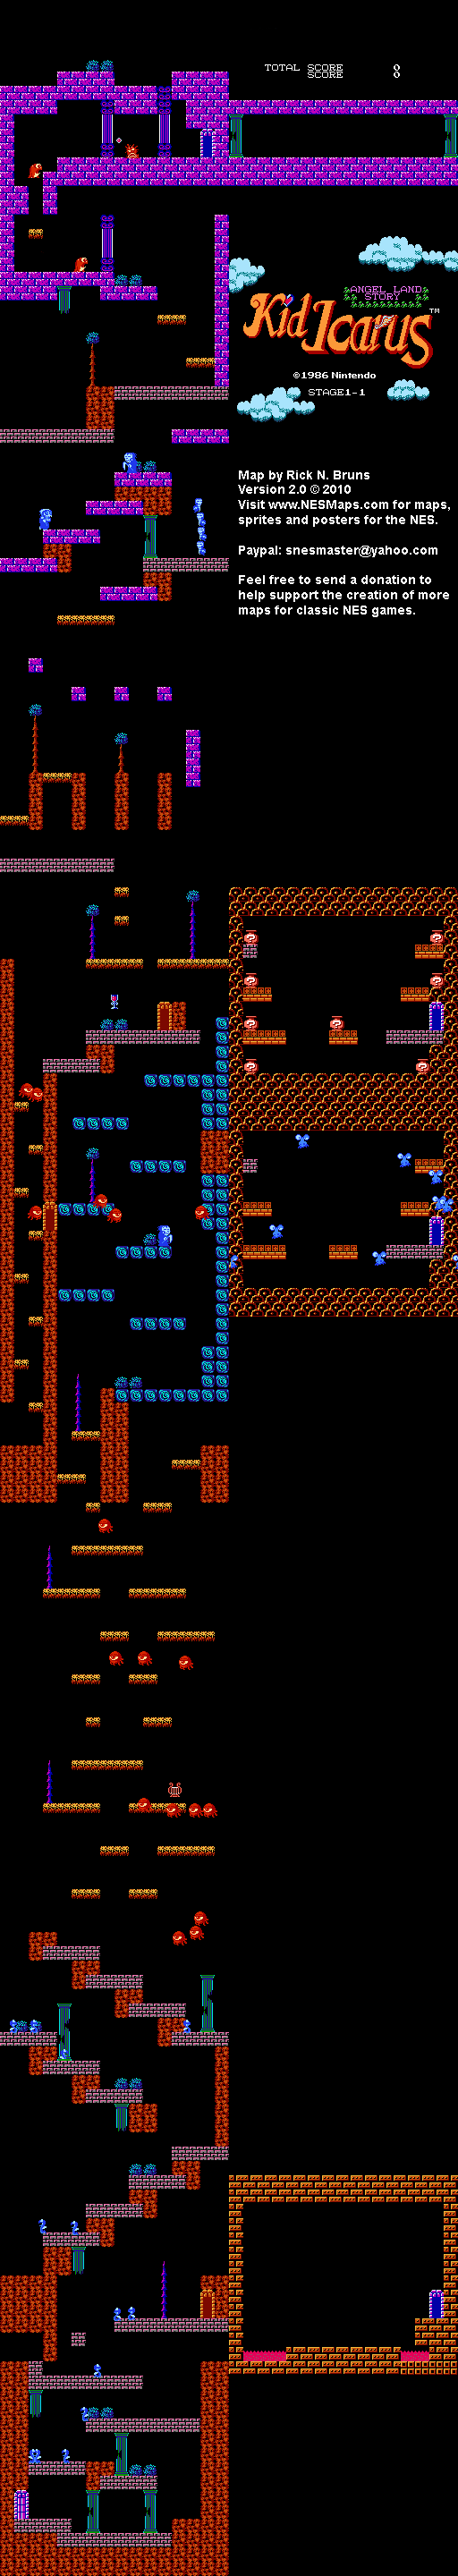 Kid Icarus - Stage 1-1 - NES Map